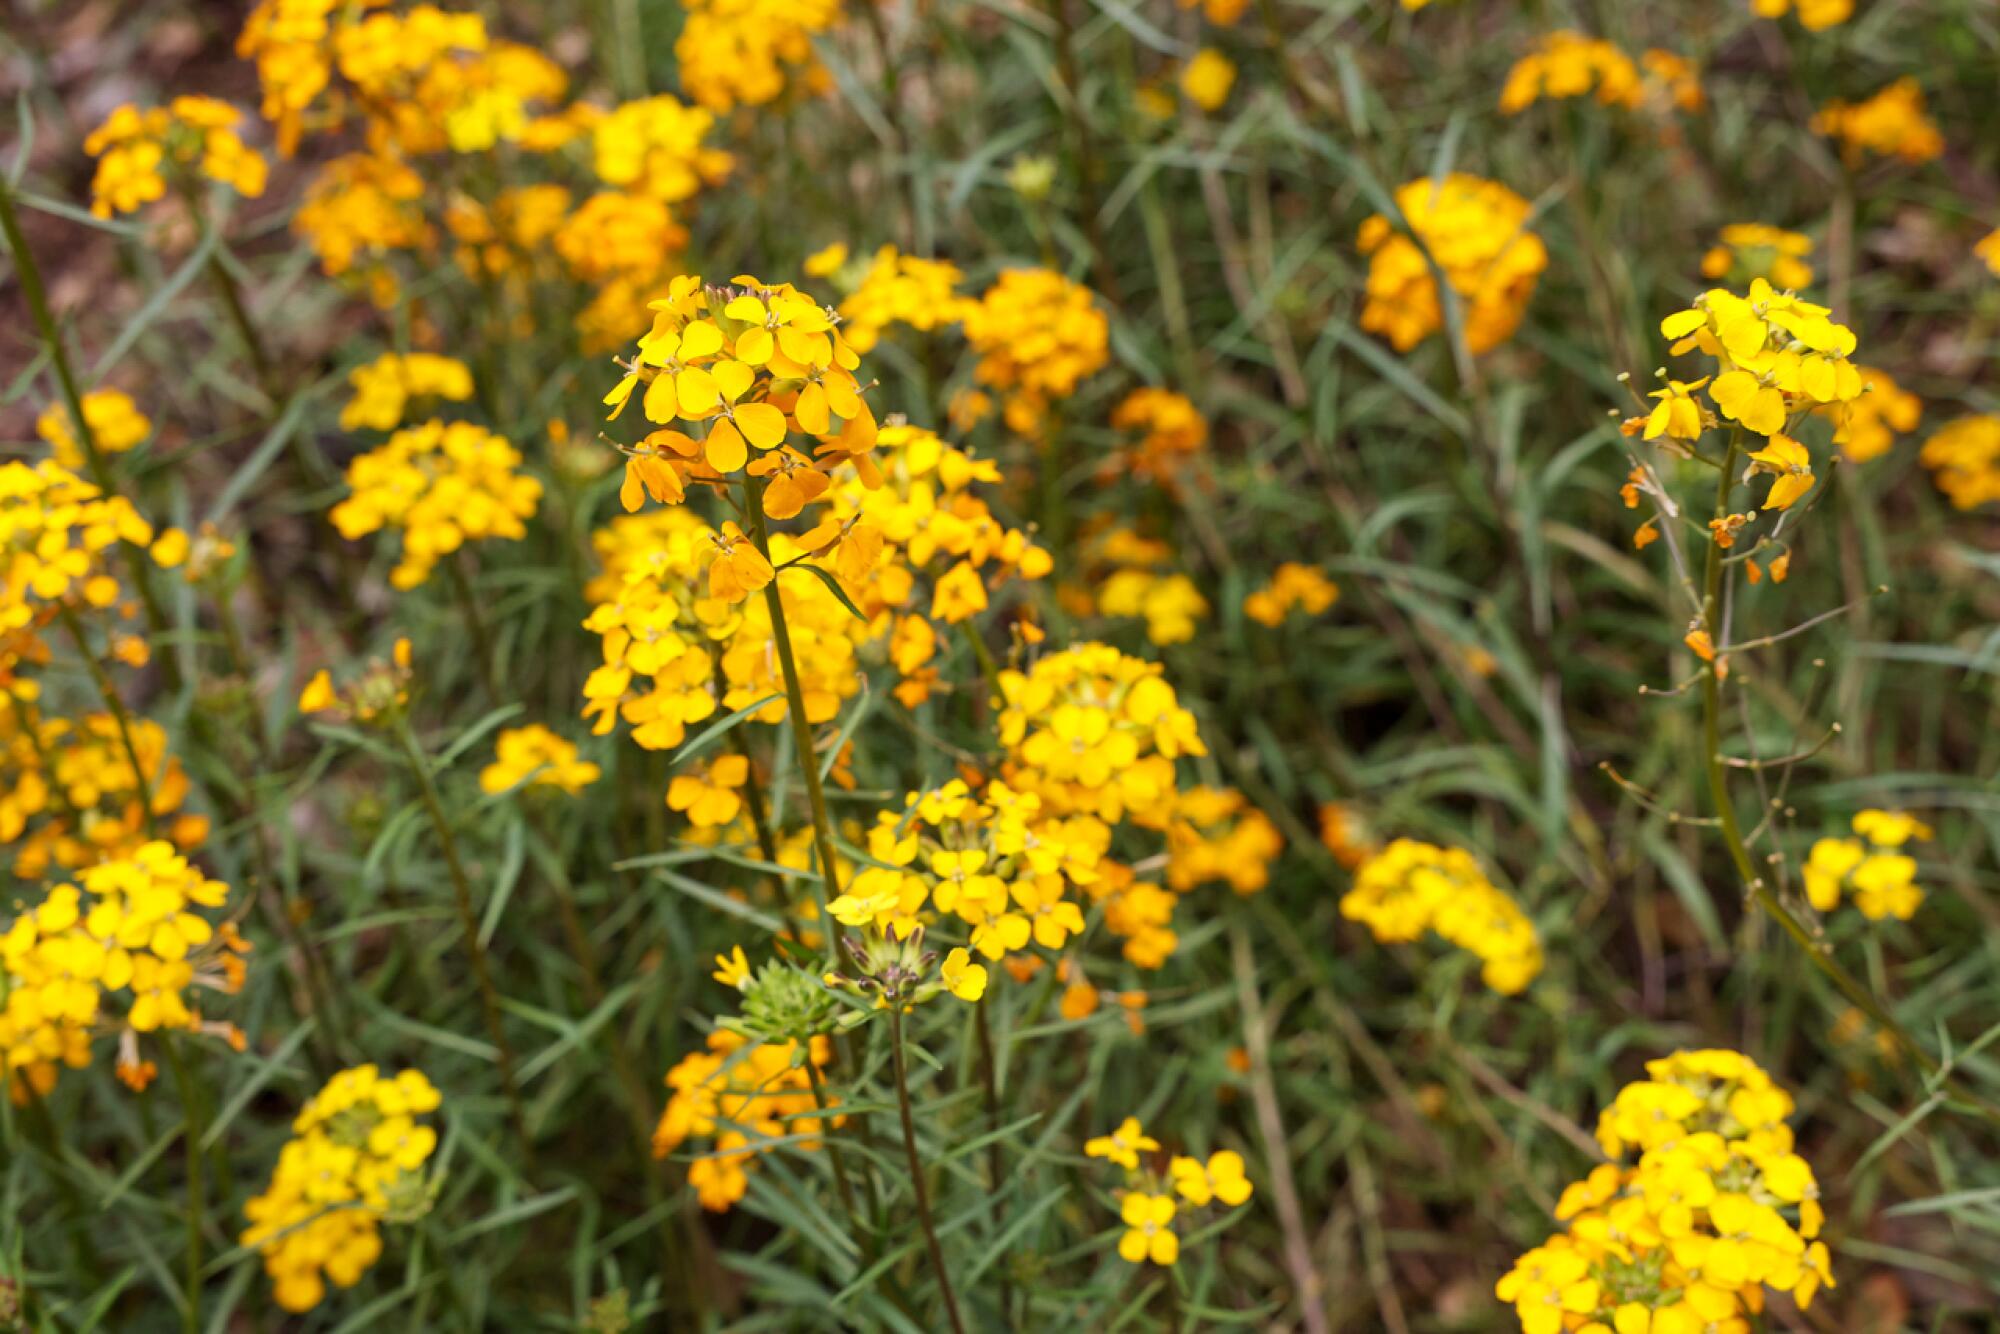 A patch of sanddune wallflowers, whose blooms look like tiny deep yellow bouquets on tall feathery stalks.